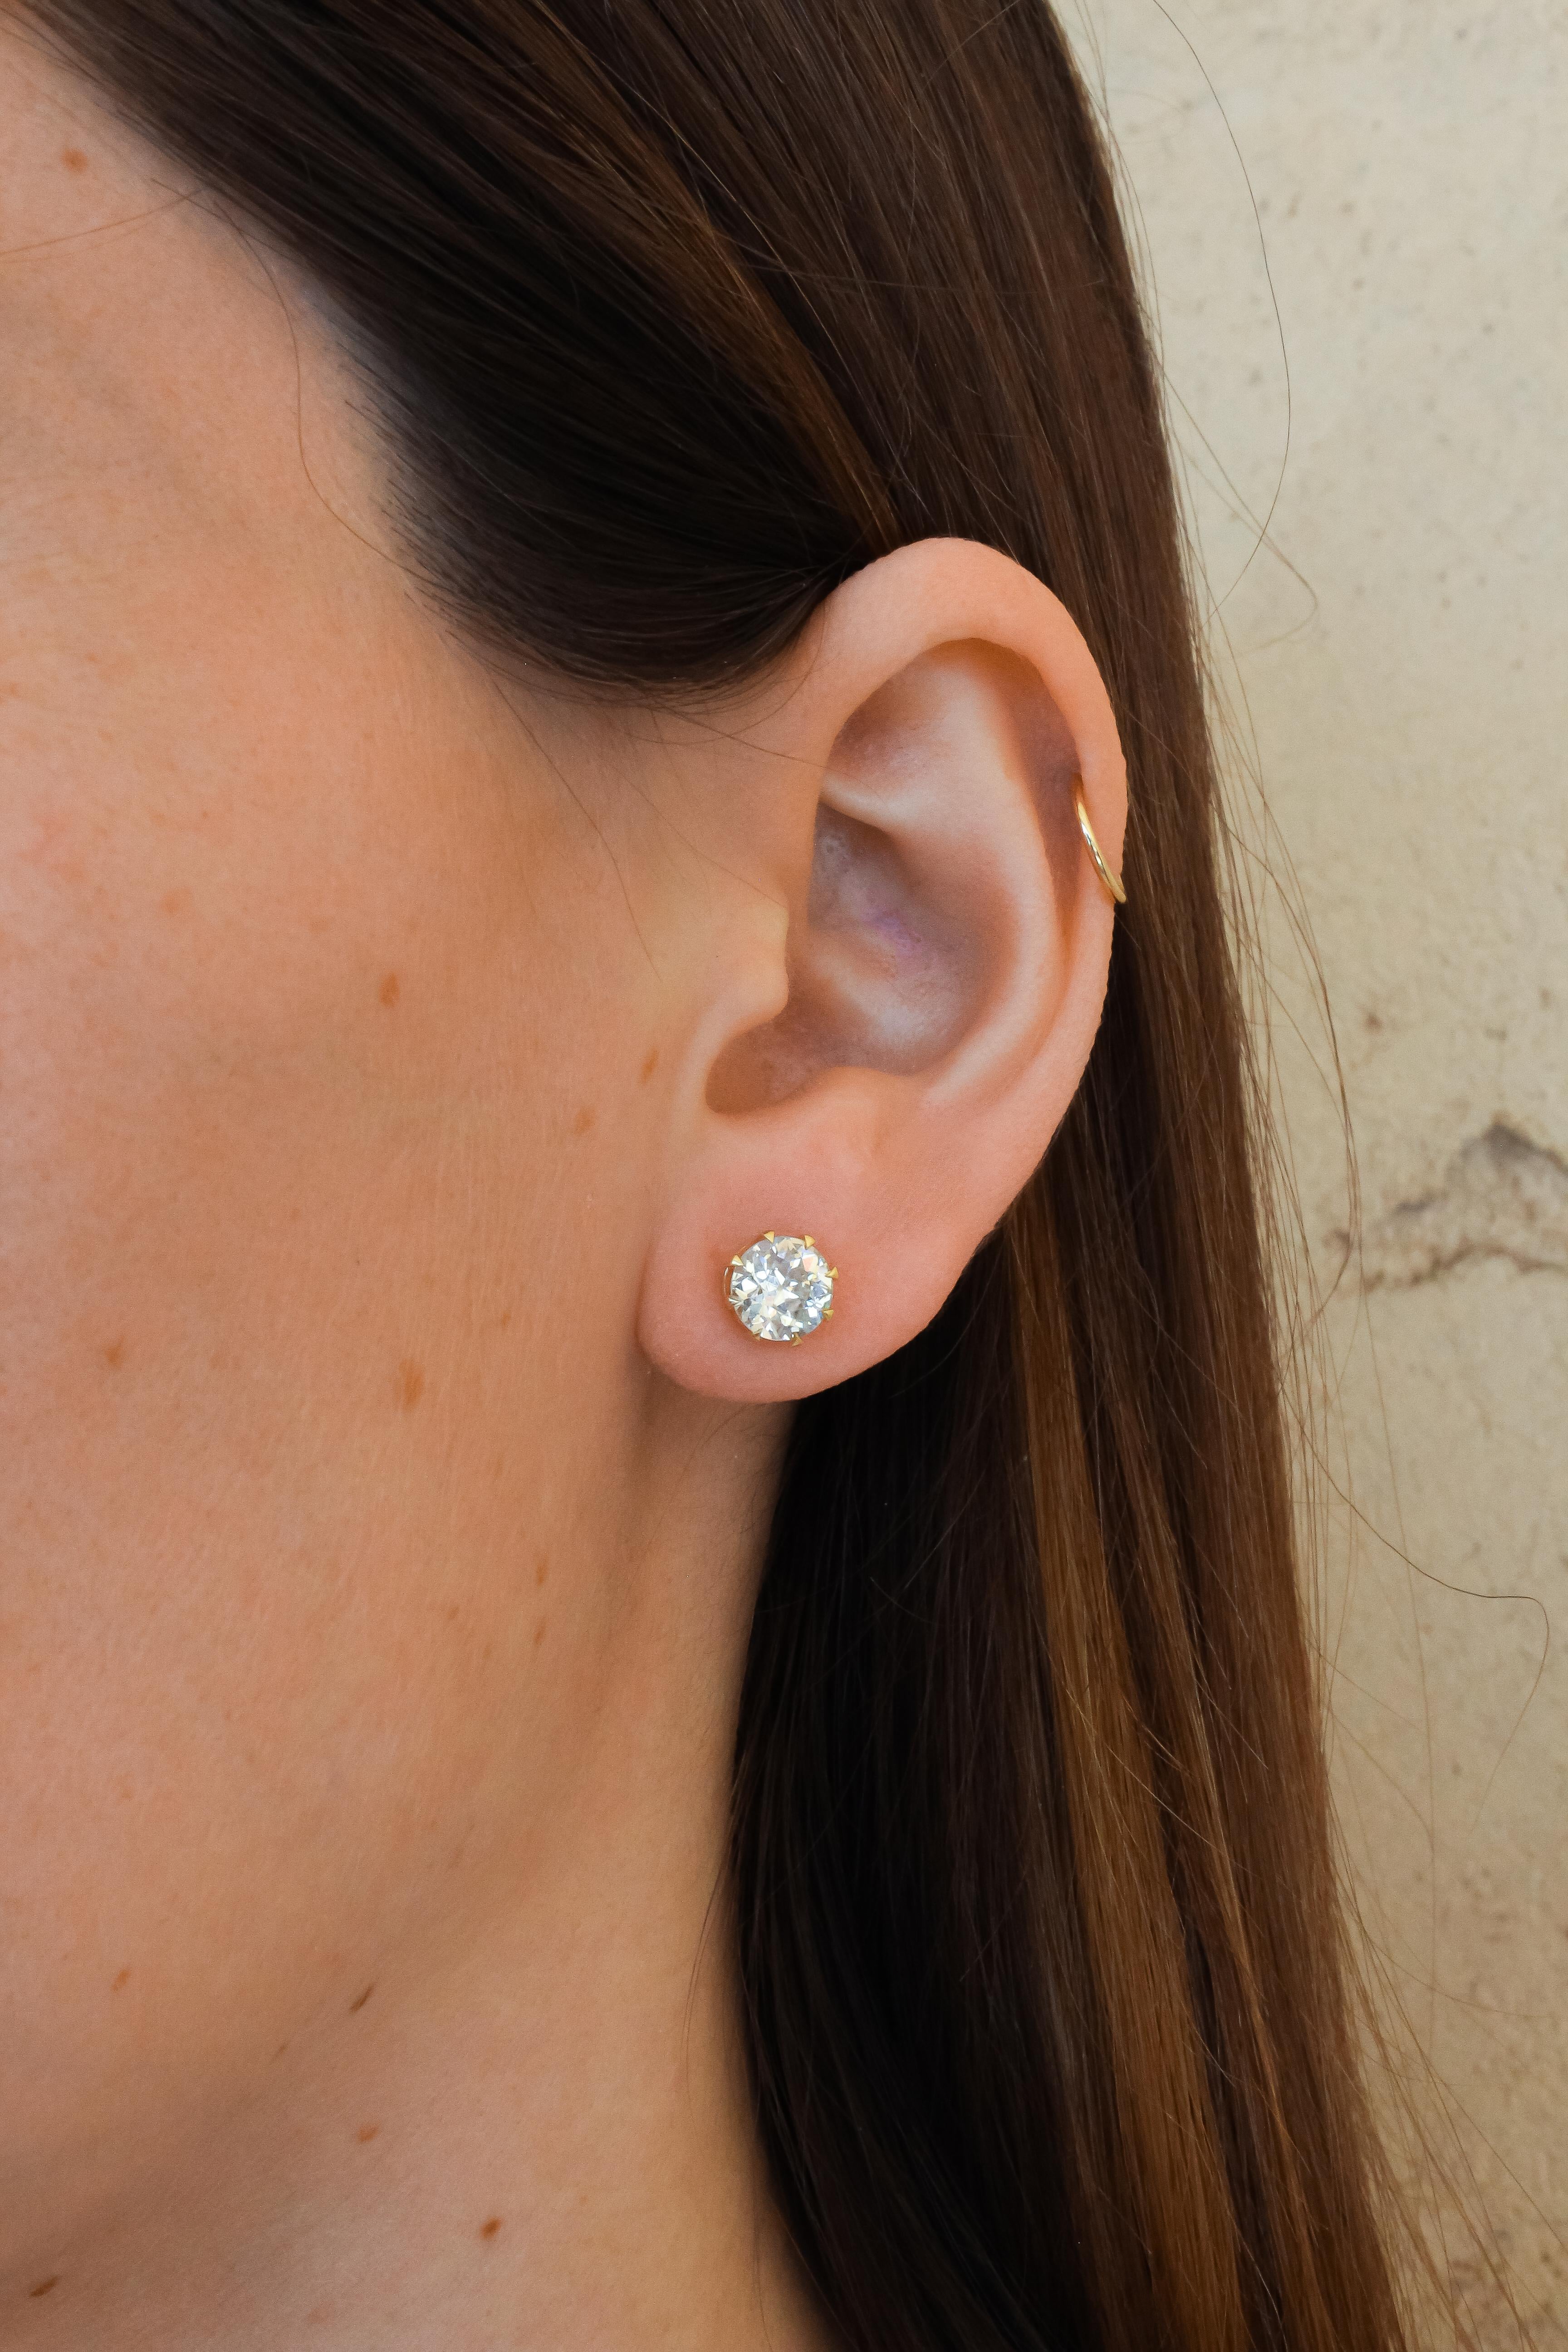 2.49ctw old European cut diamonds set in handcrafted 18k yellow gold earrings. The perfect jewelry box staple.